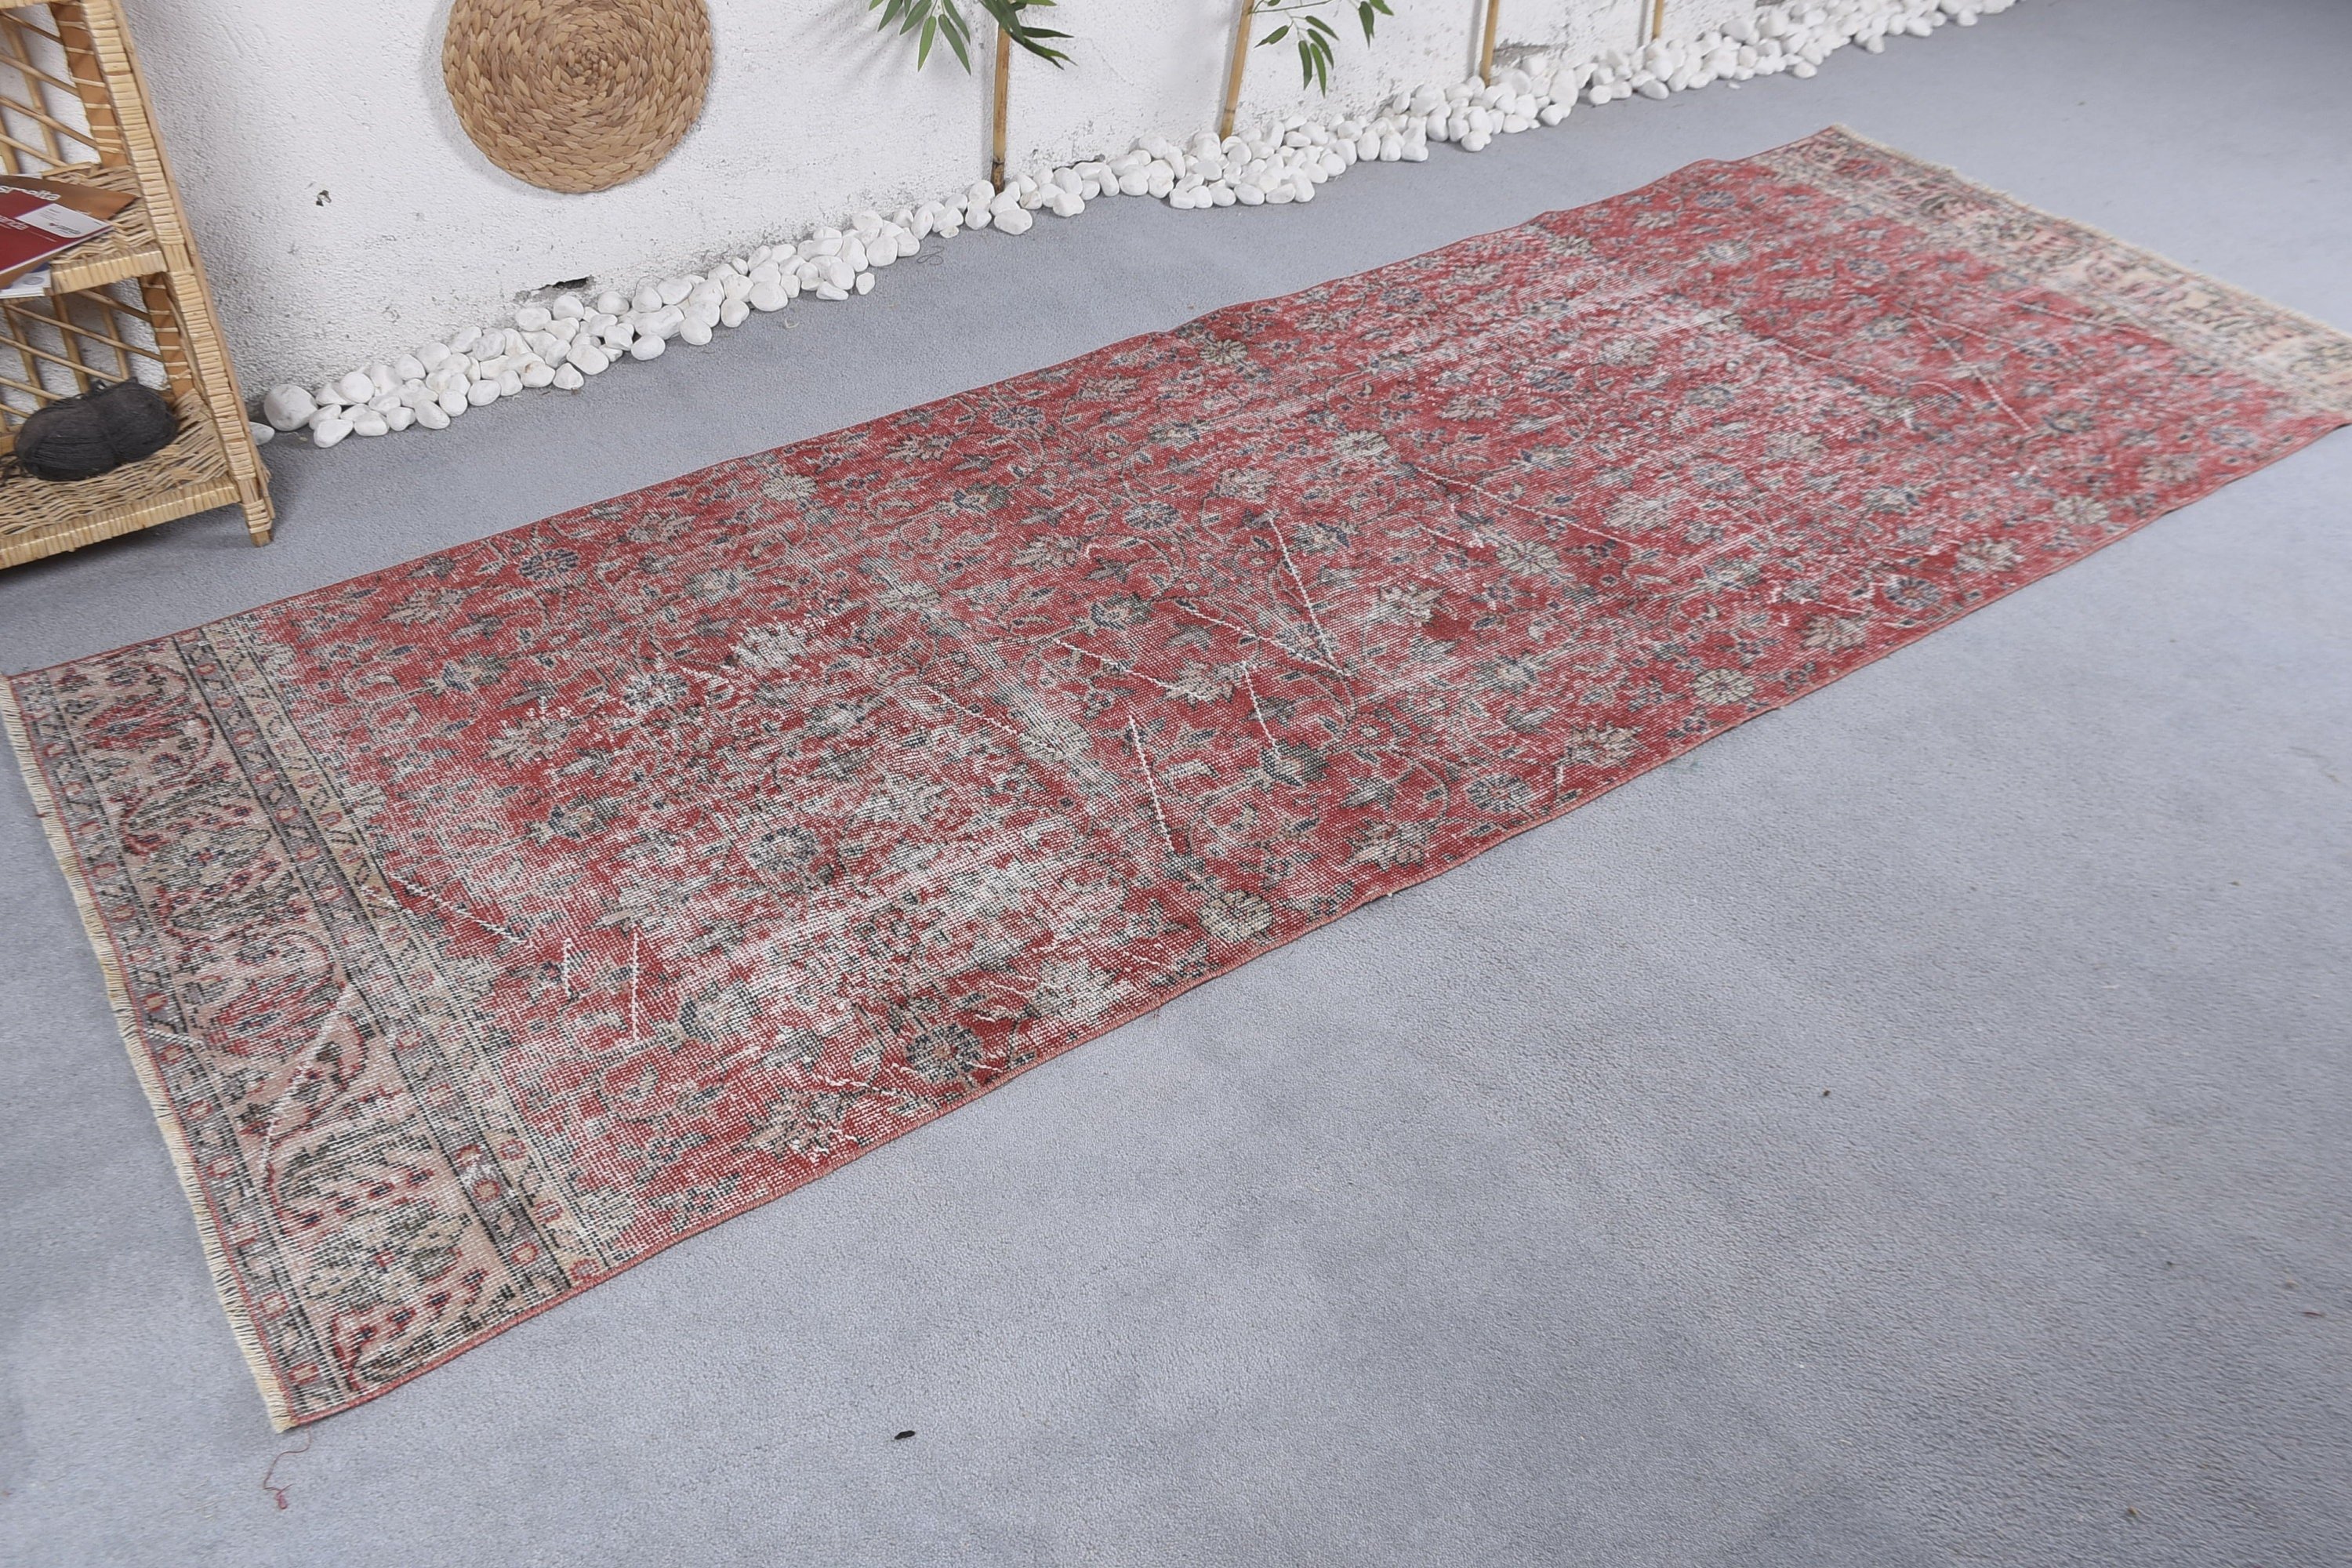 Anatolian Rug, Red  3.7x9.9 ft Runner Rugs, Turkish Rugs, Stair Rug, Rugs for Runner, Antique Rug, Vintage Rug, Kitchen Rug